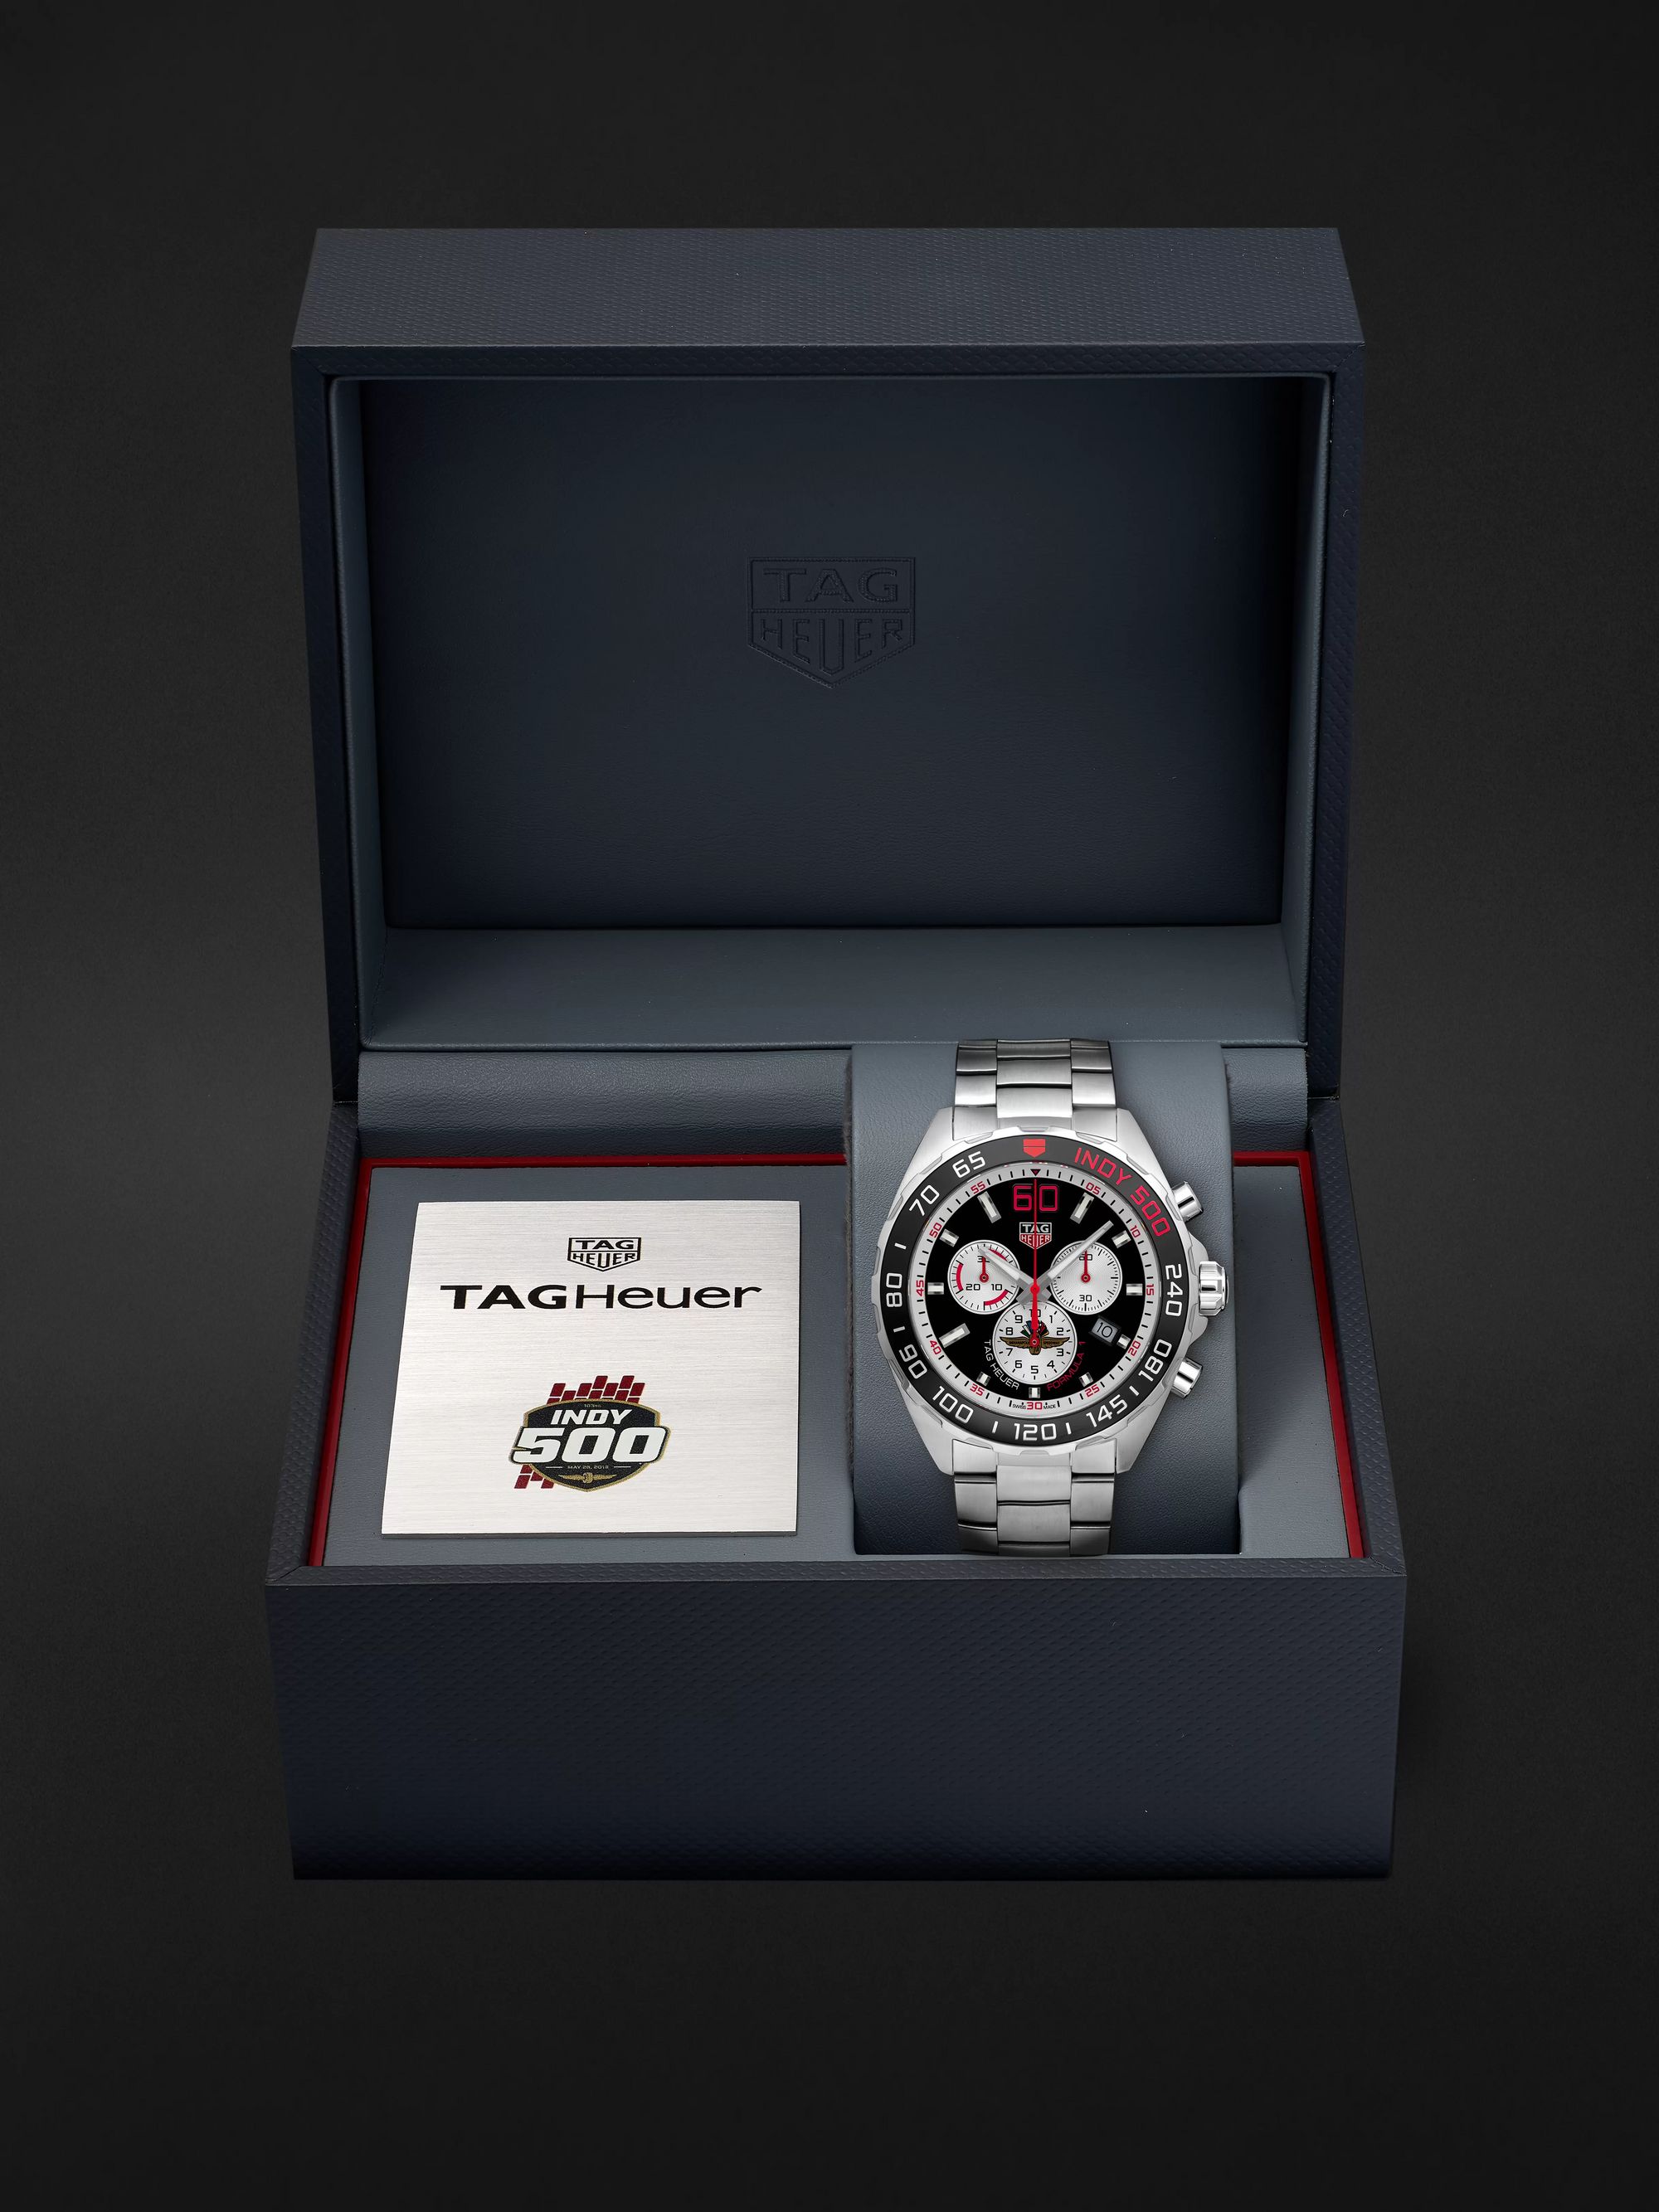 TAG Heuer Formula 1 Indy 500 Limited Edition Chronograph 43mm Stainless Steel Watch, Ref. No. CAZ101V.BA0842